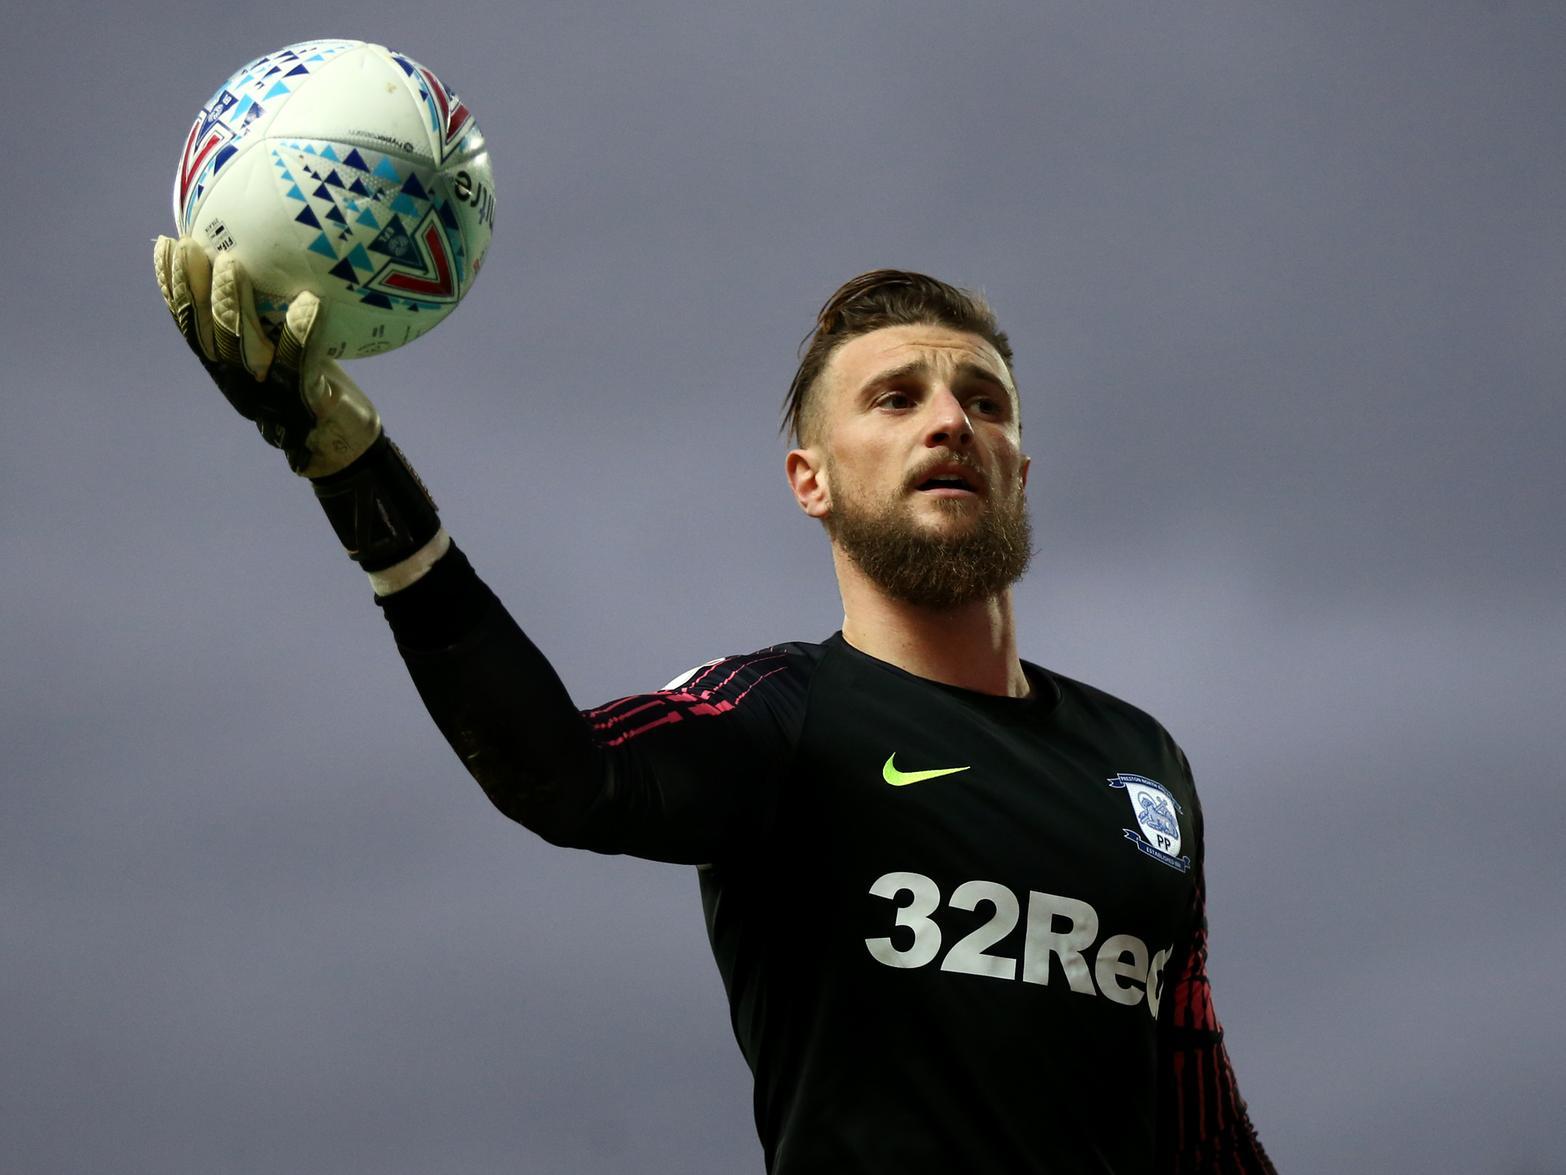 West Ham United have been linked with a move for Preston North End goalkeeper Declan Rudd, as they look to secure cover for the injured Lukasz Fabianski. (Football Insider)